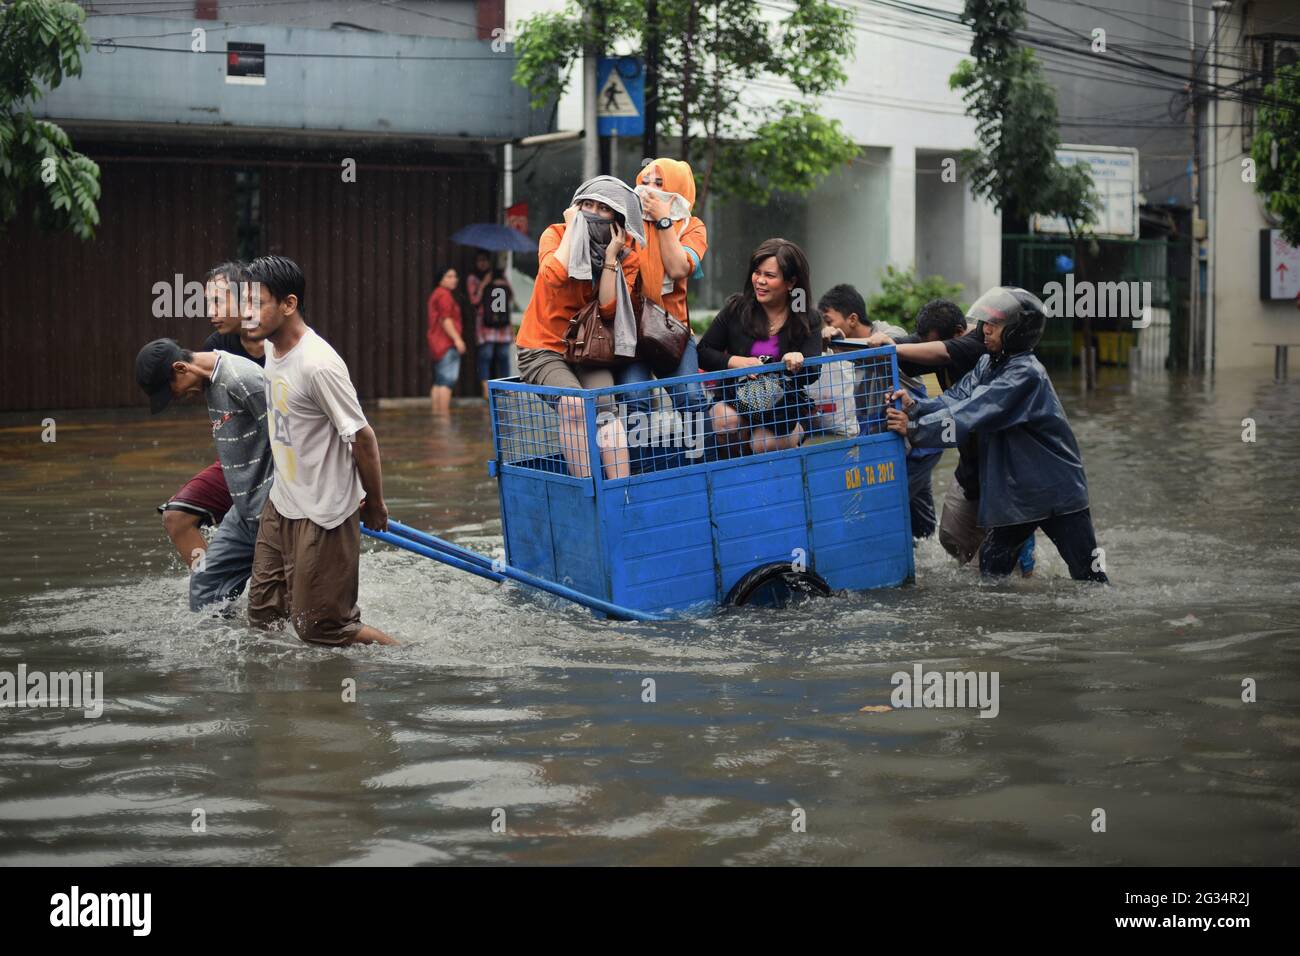 Jakarta, Indonesia. 9th February 2015. Men helping women to travel through a flooded street by a cart in Jakarta, after a continuous rain left the downtown area of the Indonesian capital city flooded. Stock Photo